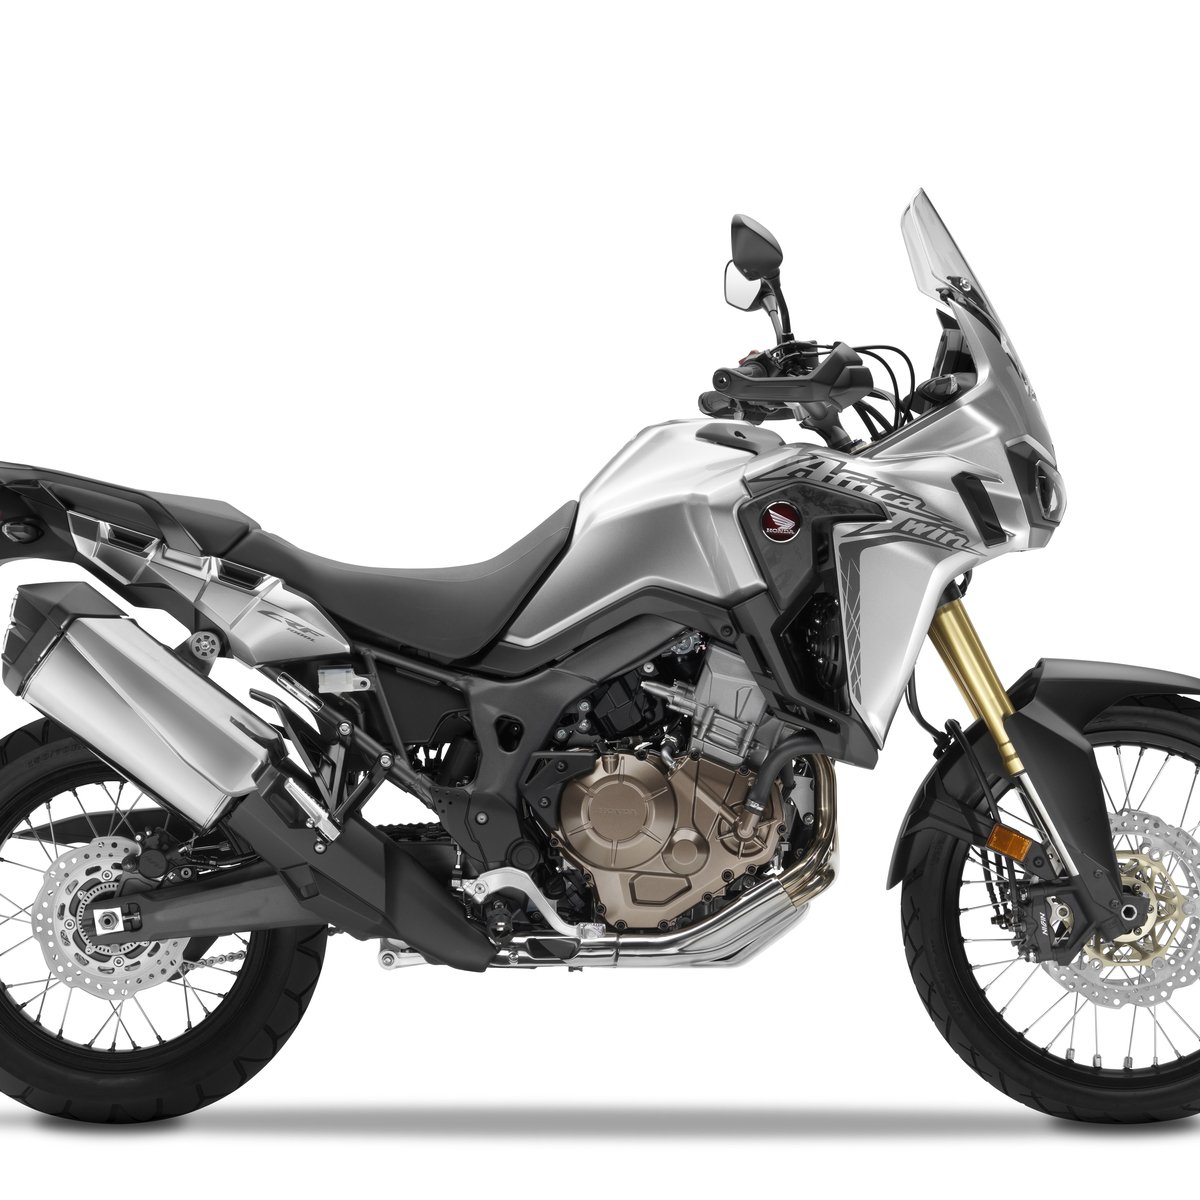 Honda Africa Twin CRF 1000 L ABS (2016 - 17)